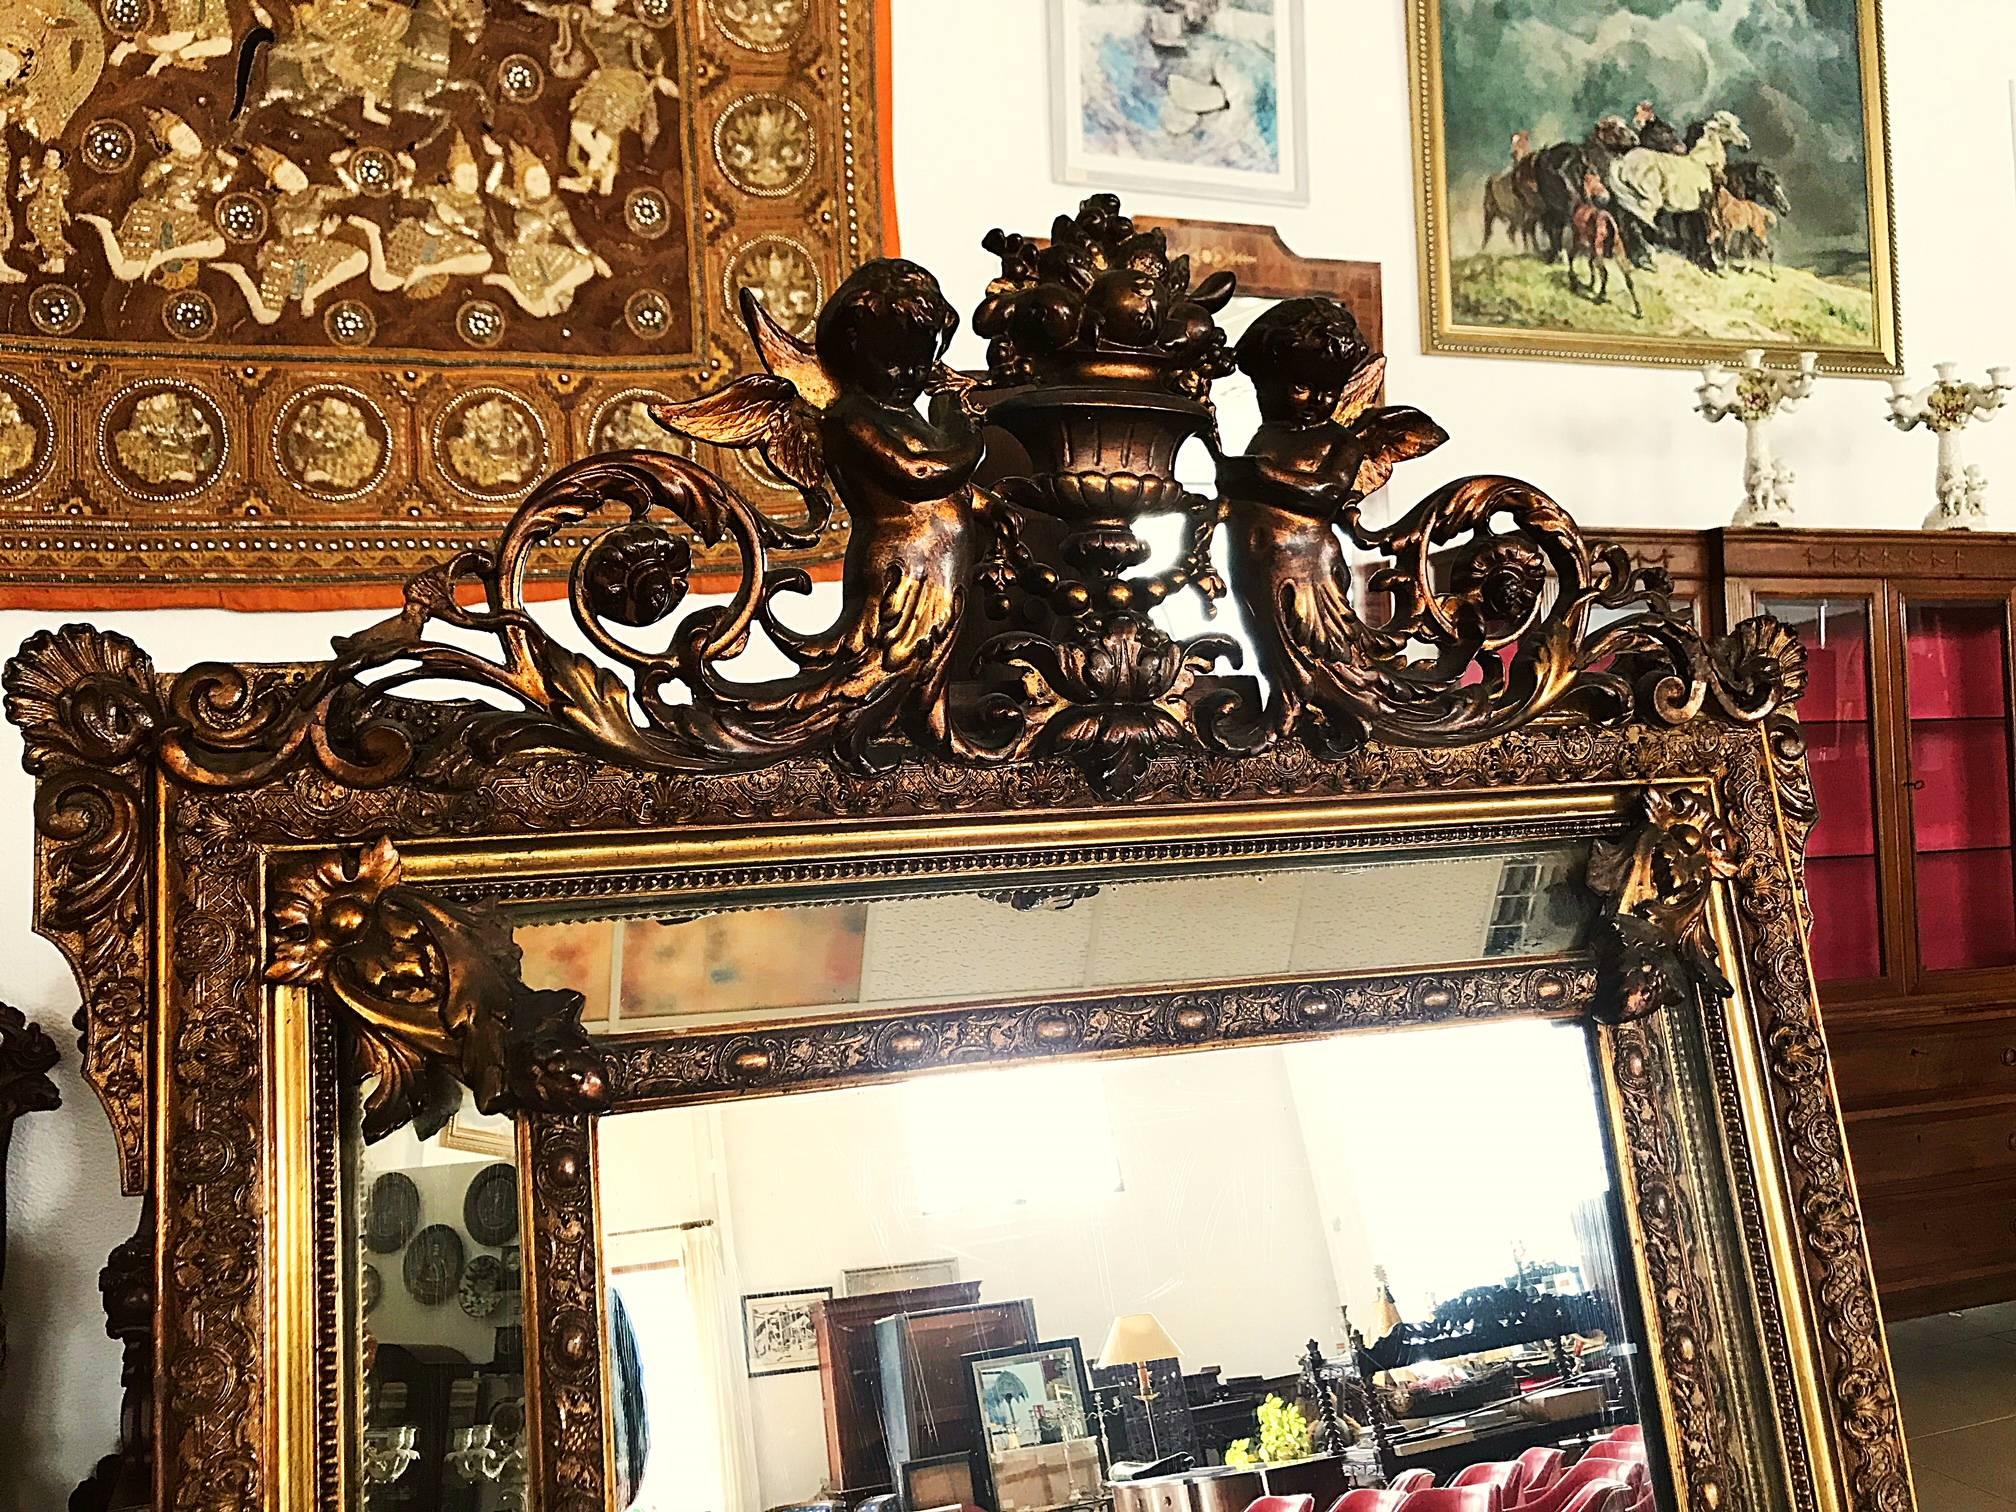 Add French elegance to your home with this antique mirror from Versailles, France. Crafted, circa 1890, the wall mirror is in pristine condition with original gilt finish. This "miroir a parcloses" has a central rectangular mirror with